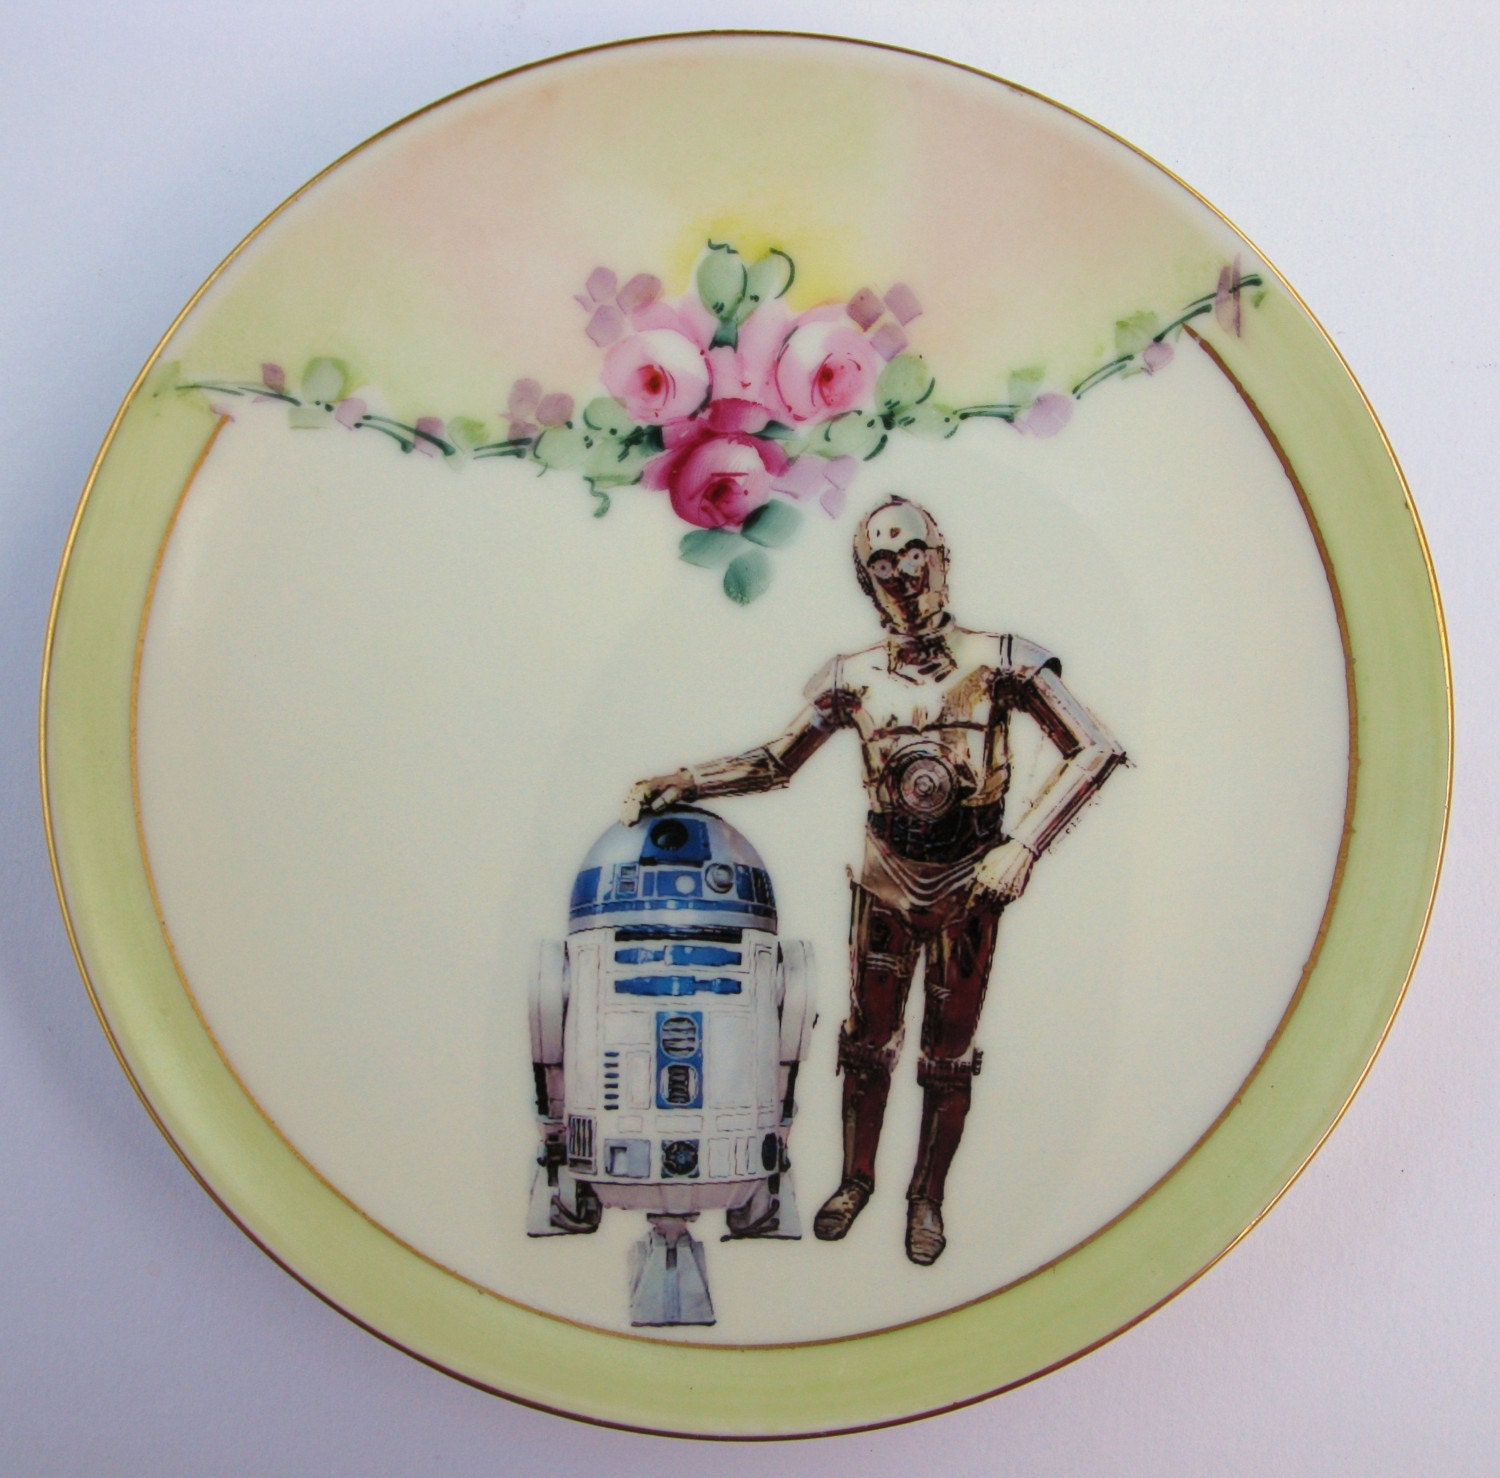 BFF C-3PO and R2-D2 portrait plate - Altered Antique Plate